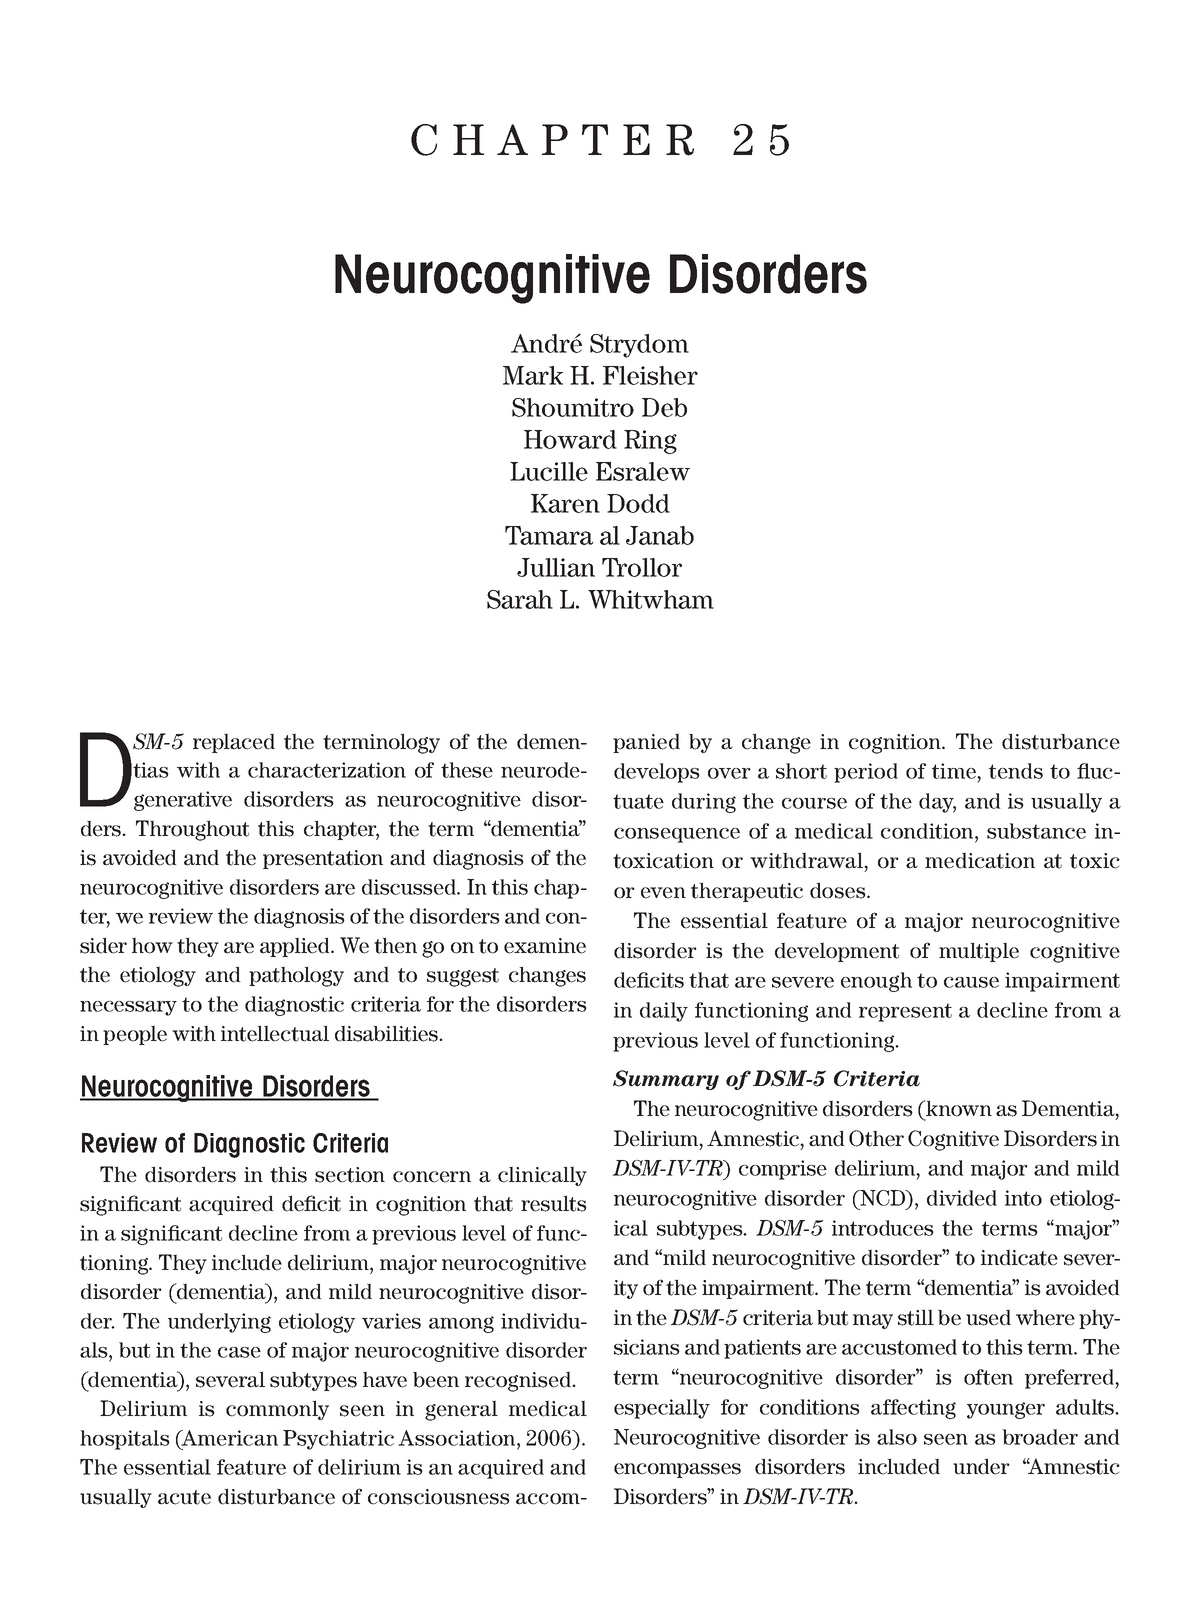 case study 2 for neurocognitive disorders alice